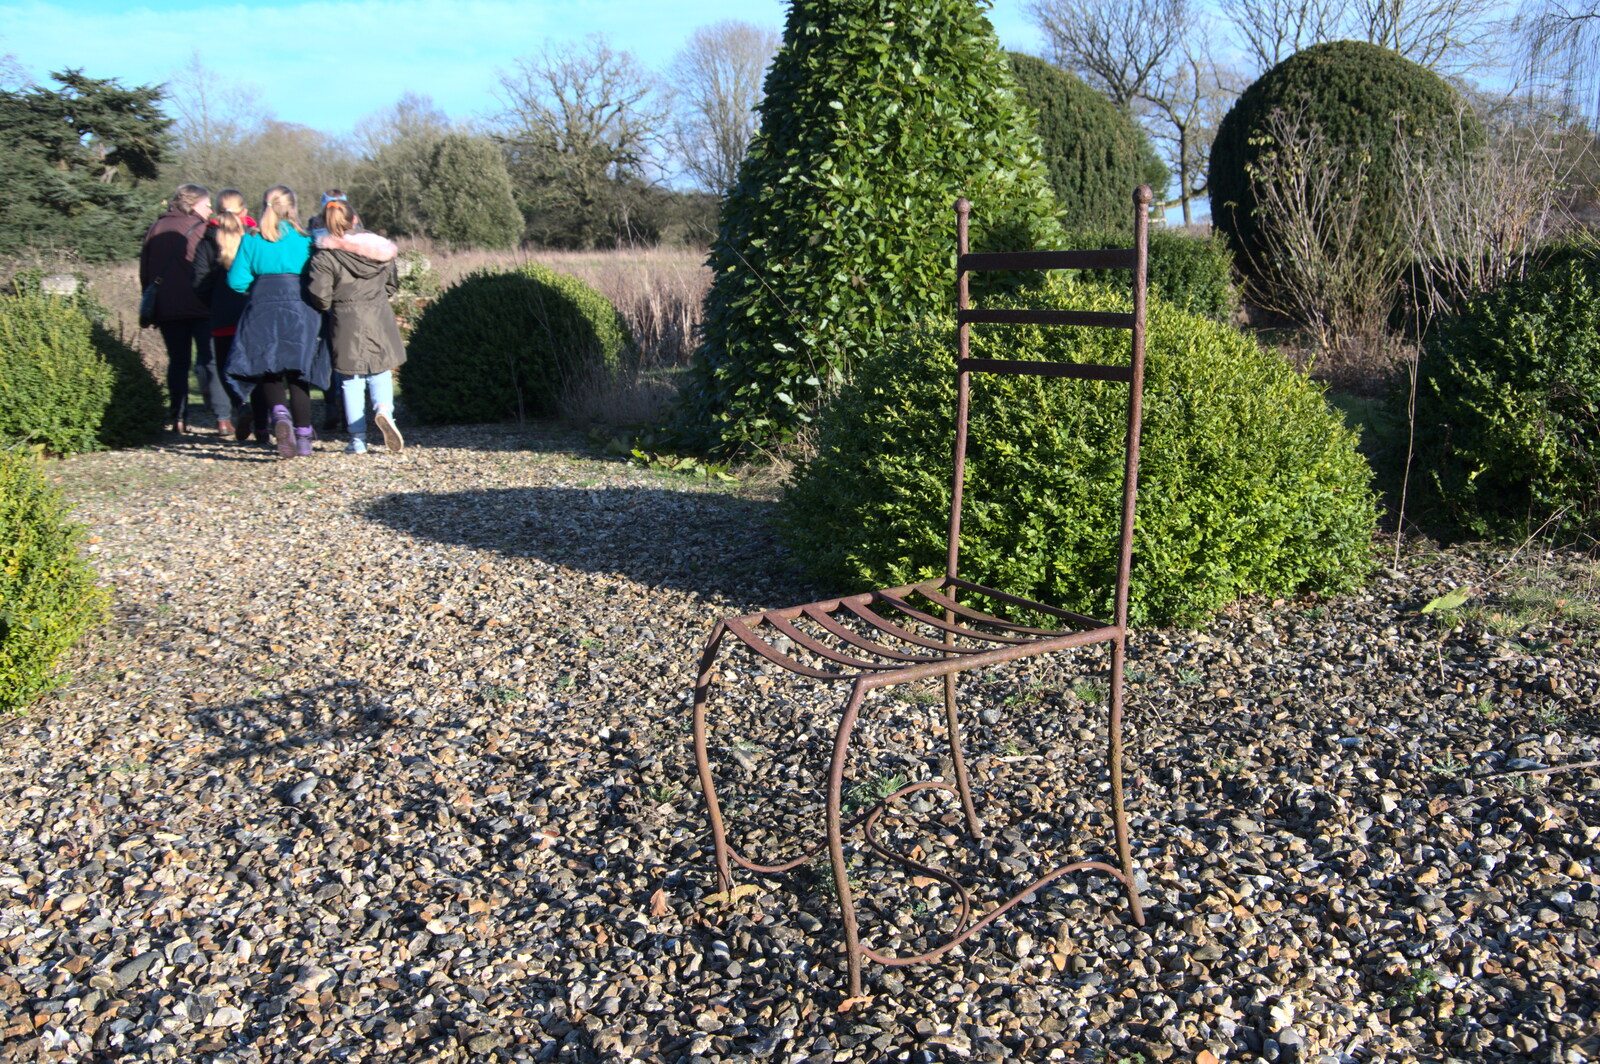 An iron chair from Snowdrops at Talconeston Hall, Tacolneston, Norfolk - 7th February 2020